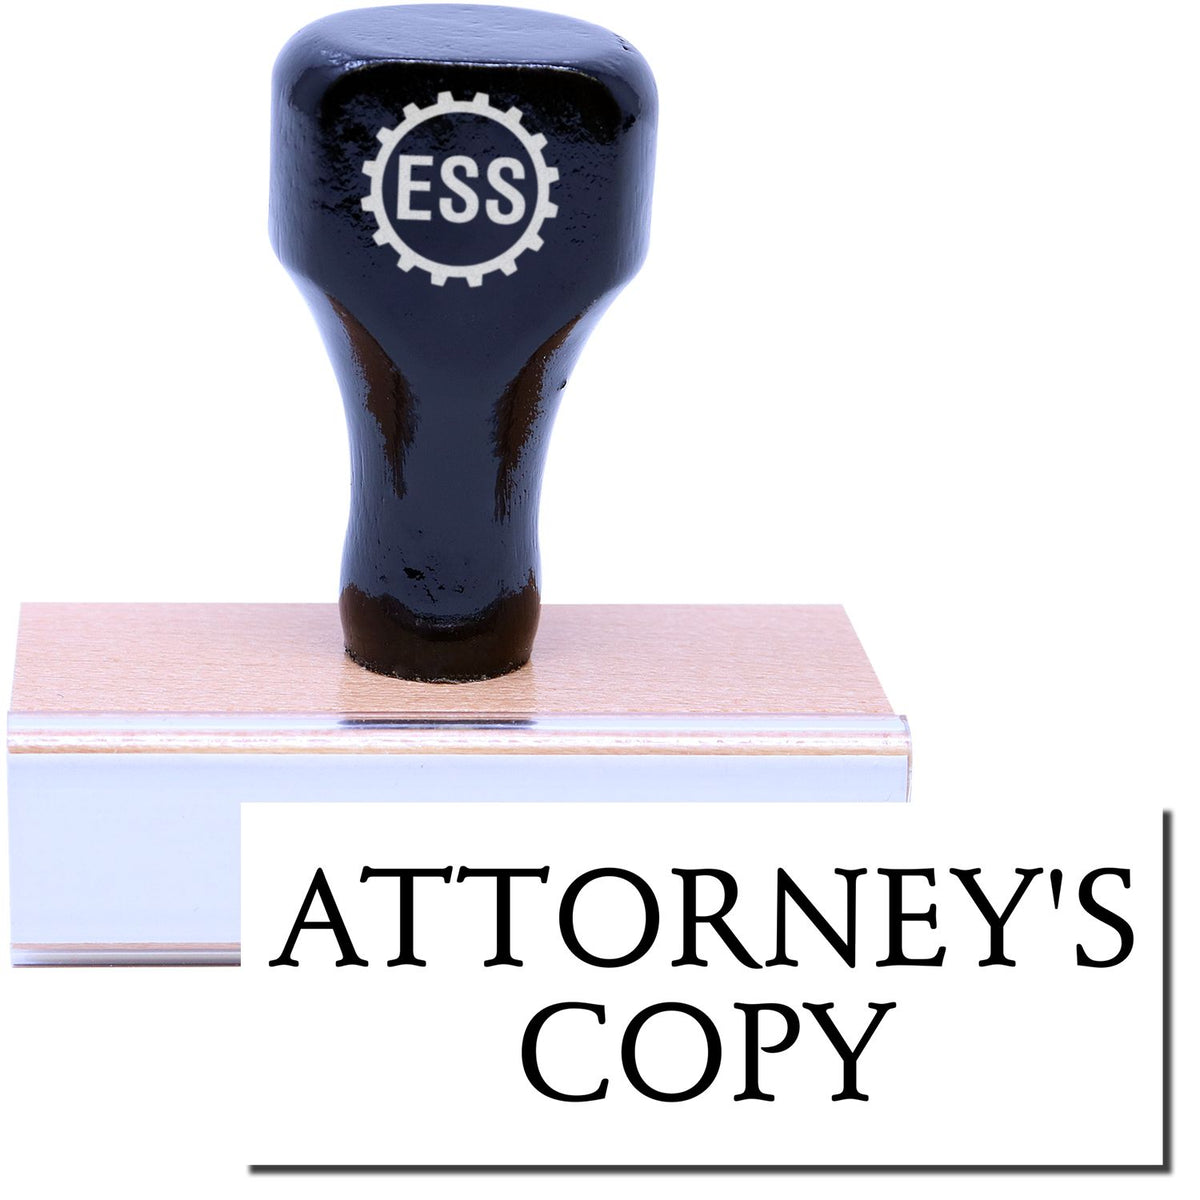 A stock office rubber stamp with a stamped image showing how the text &quot;ATTORNEY&#39;S COPY&quot; is displayed after stamping.